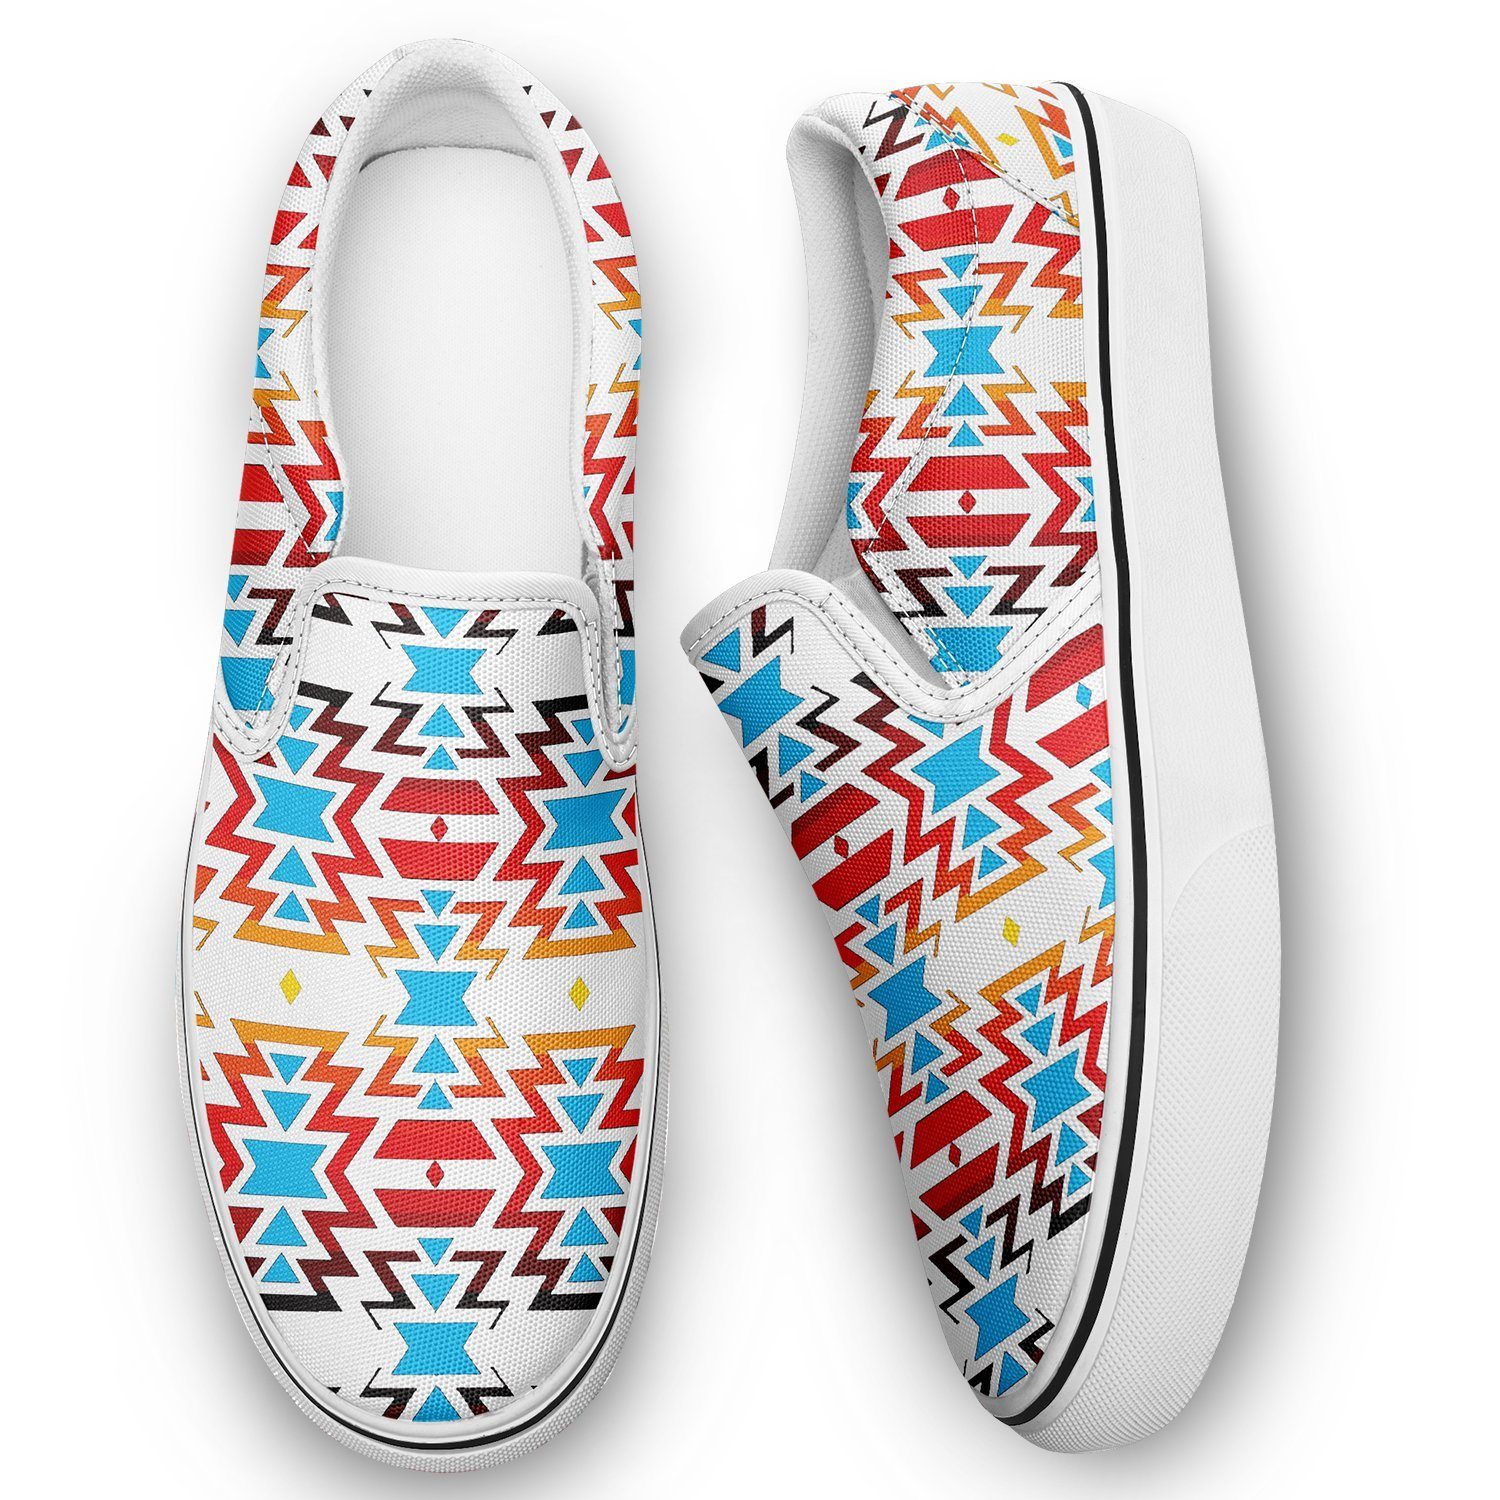 Fire Colors and Sky Otoyimm Kid's Canvas Slip On Shoes 49 Dzine 